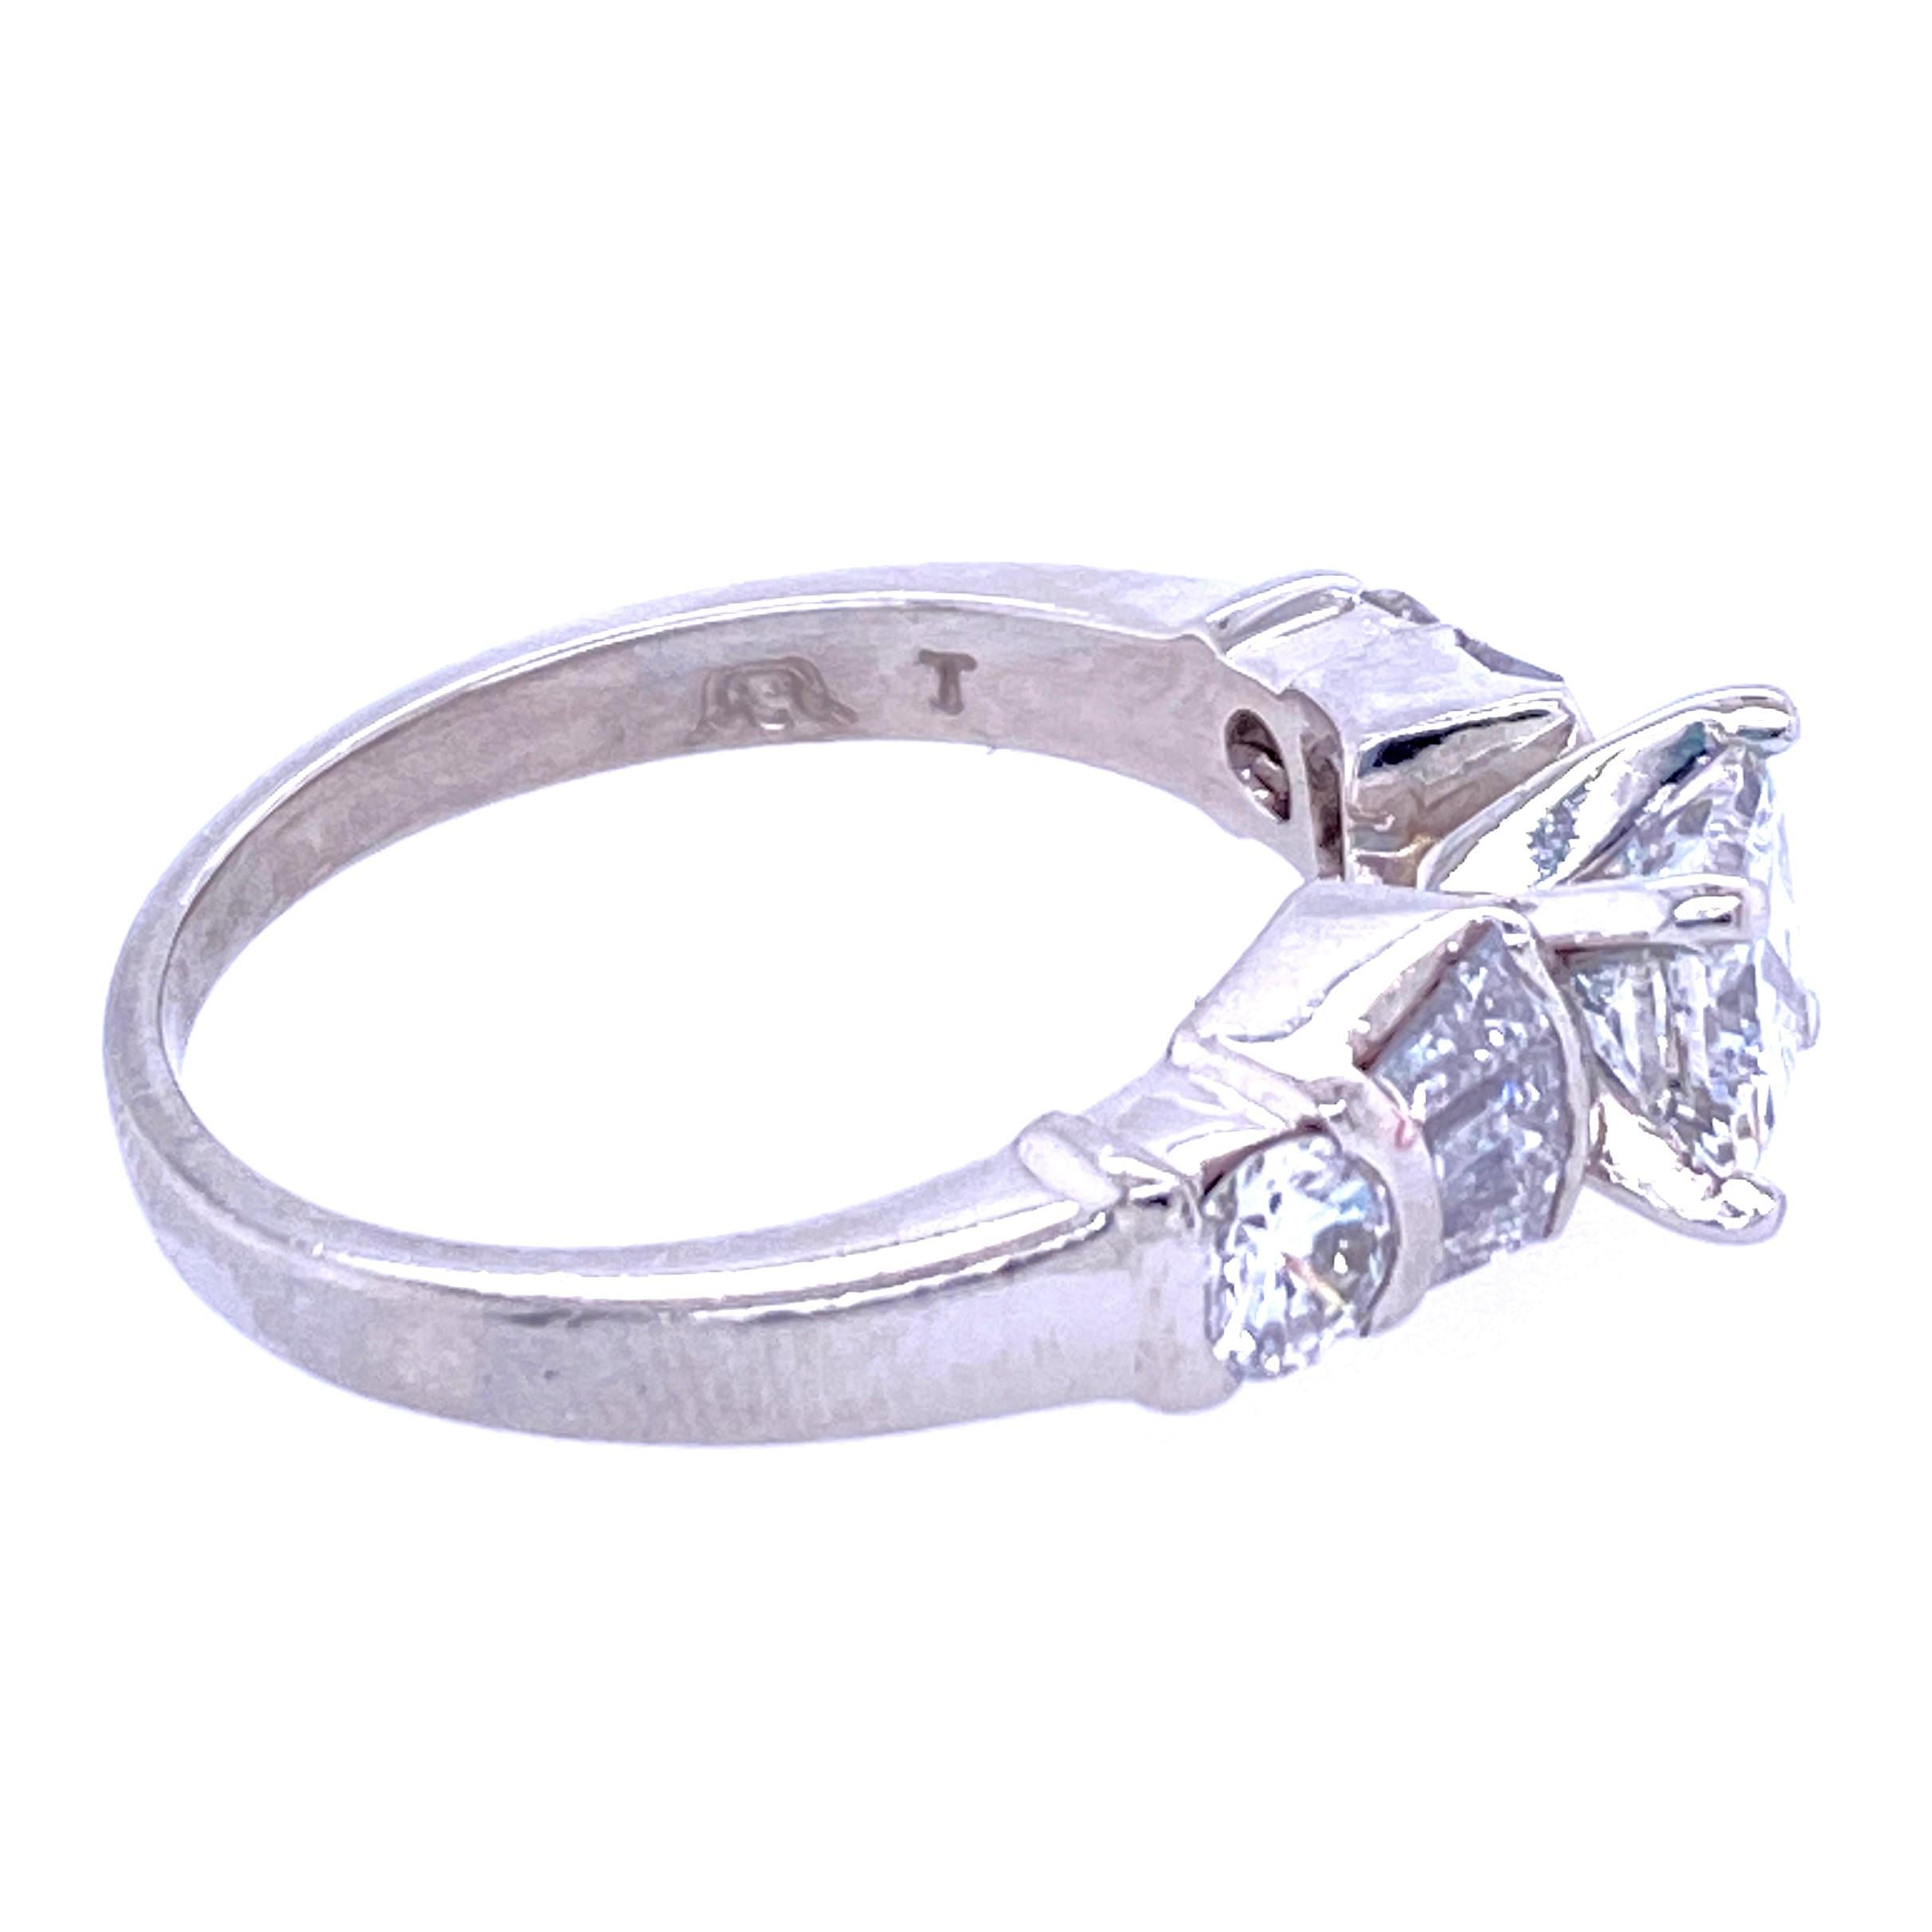 Platinum (stamped PLAT) set with 5x4.75mm princess cut diamond, 0.75 carat with H color and SI2 clarity flanked by three tapered baguettes on either side, approximately 0.30 carat total weight and one 3.5mm round brilliant diamond, approximately